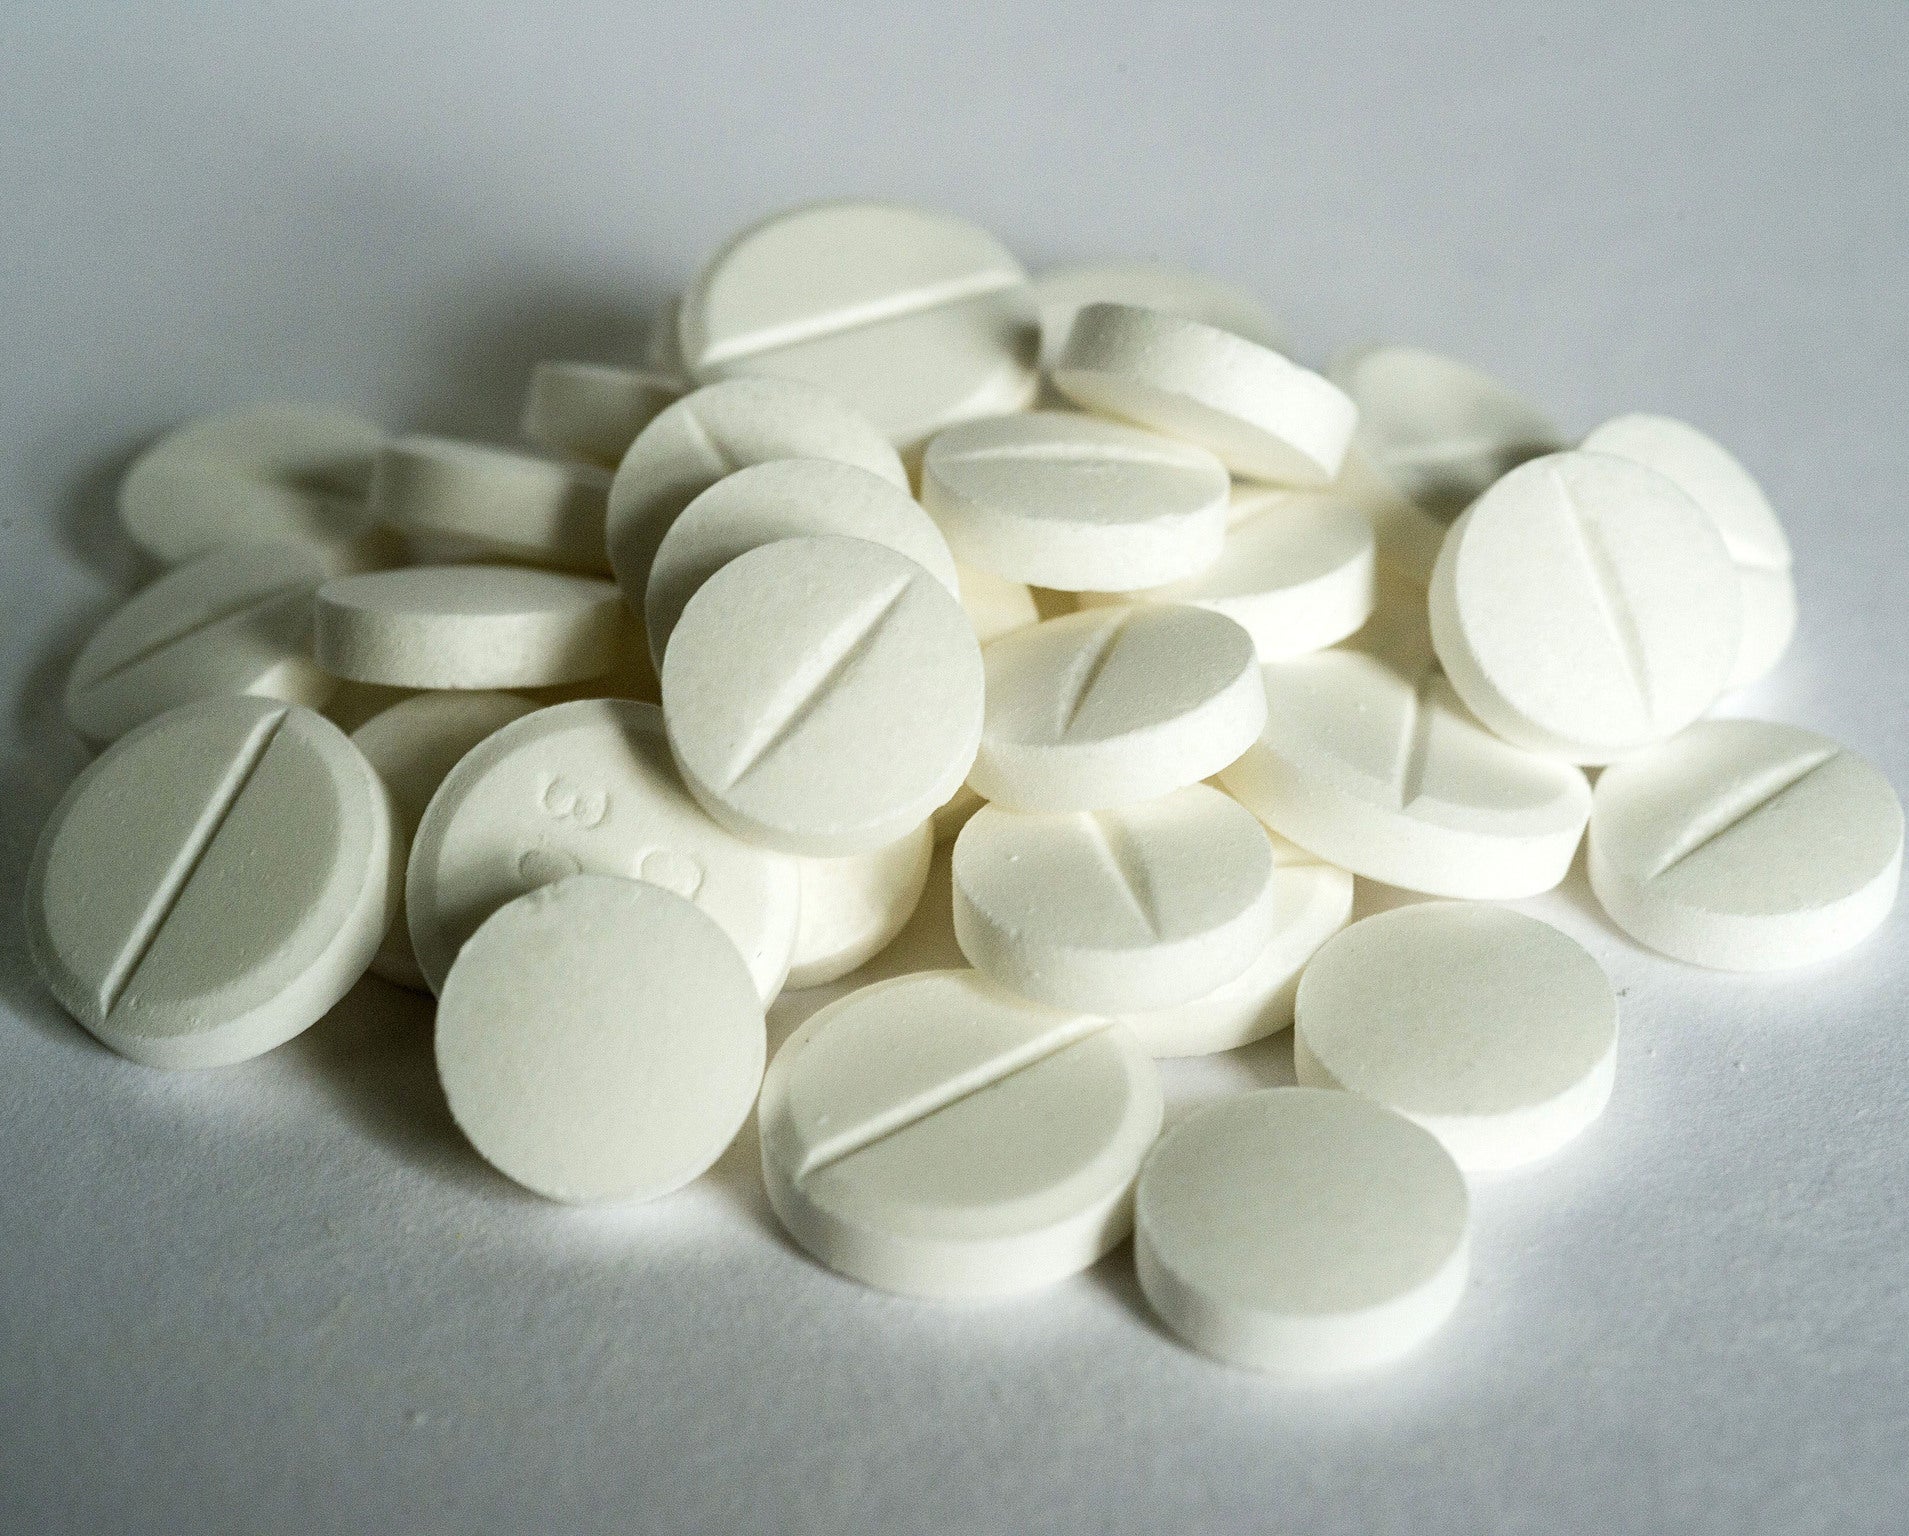 A daily aspirin dose has limited health benefits for older people